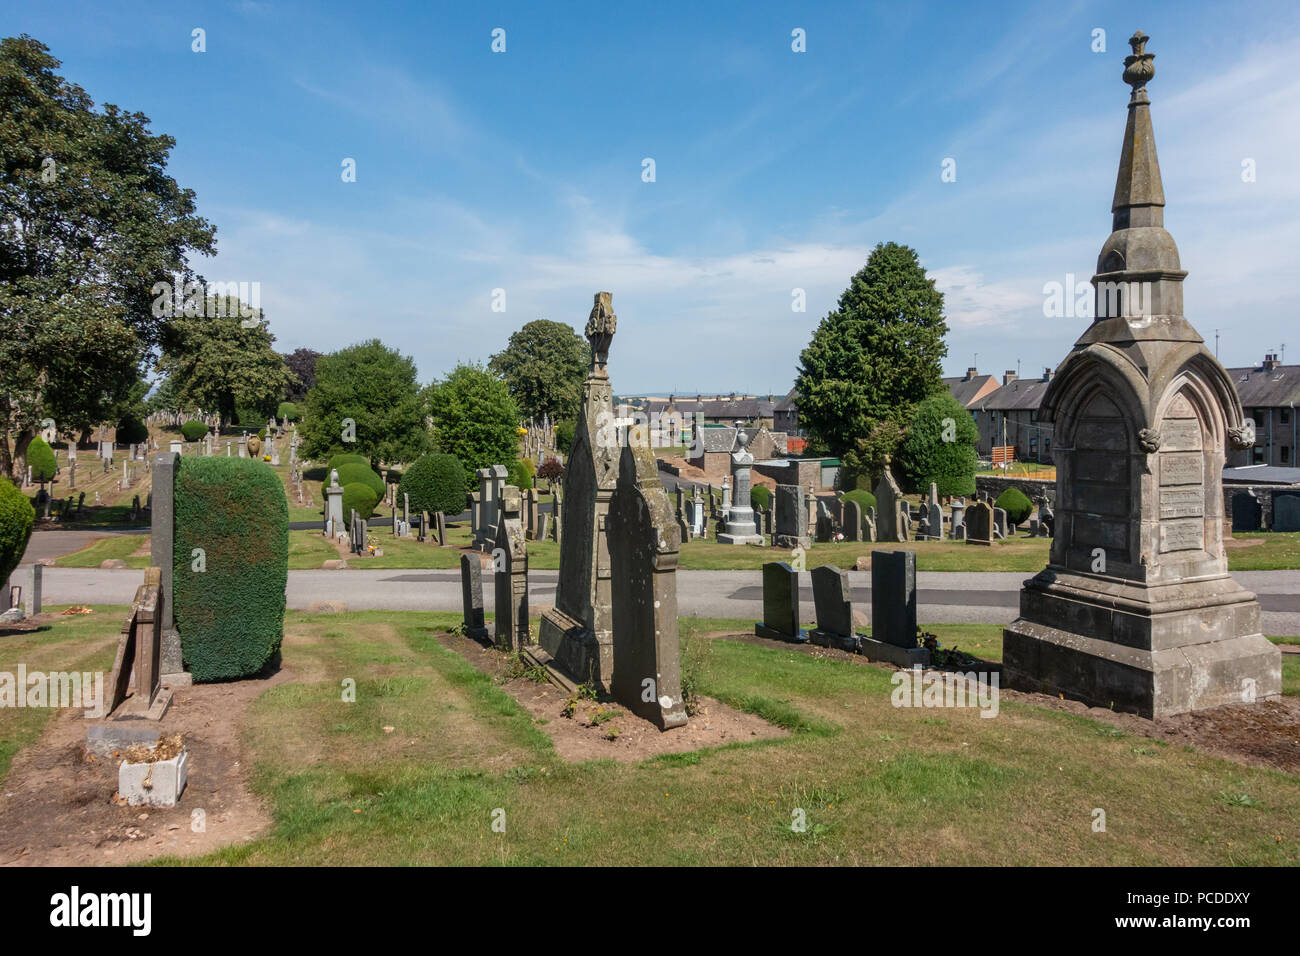 Graves in the cemetery at Kirriemuir in Scotland. A place to go an remember loved ones. Stock Photo